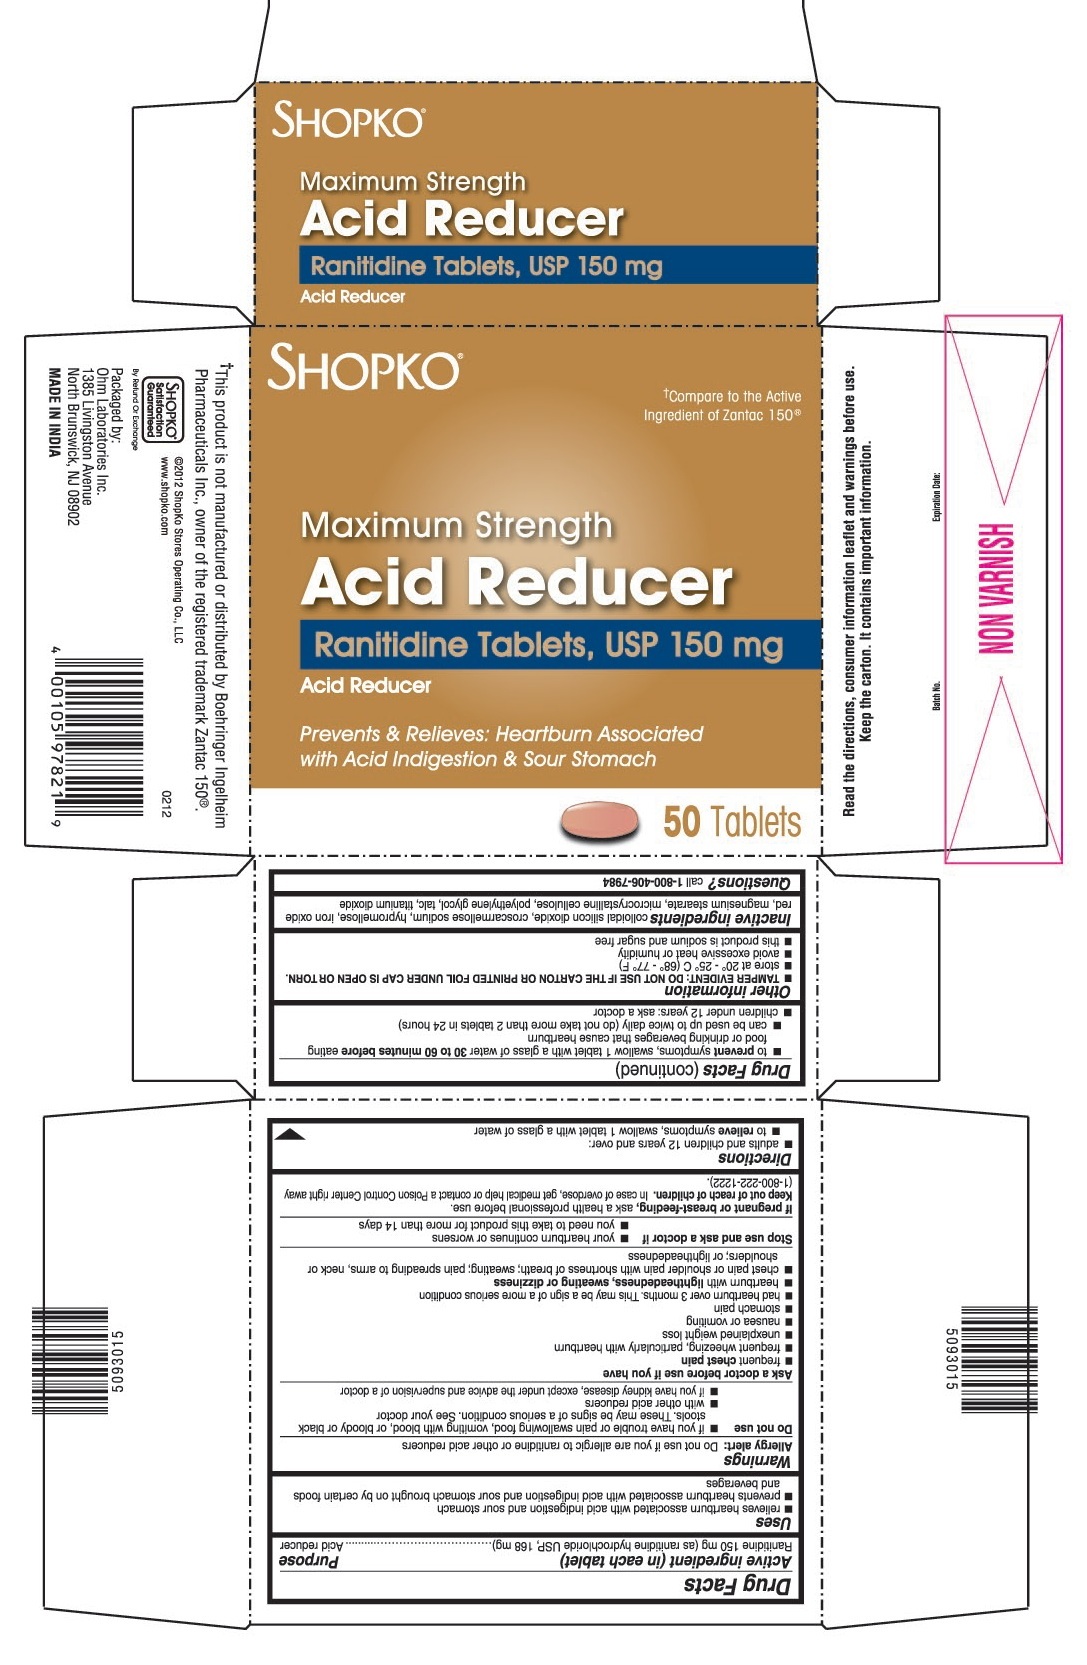 This is the 50 count bottle carton label for Shopko Ranitidine tablets, USP 150 mg.